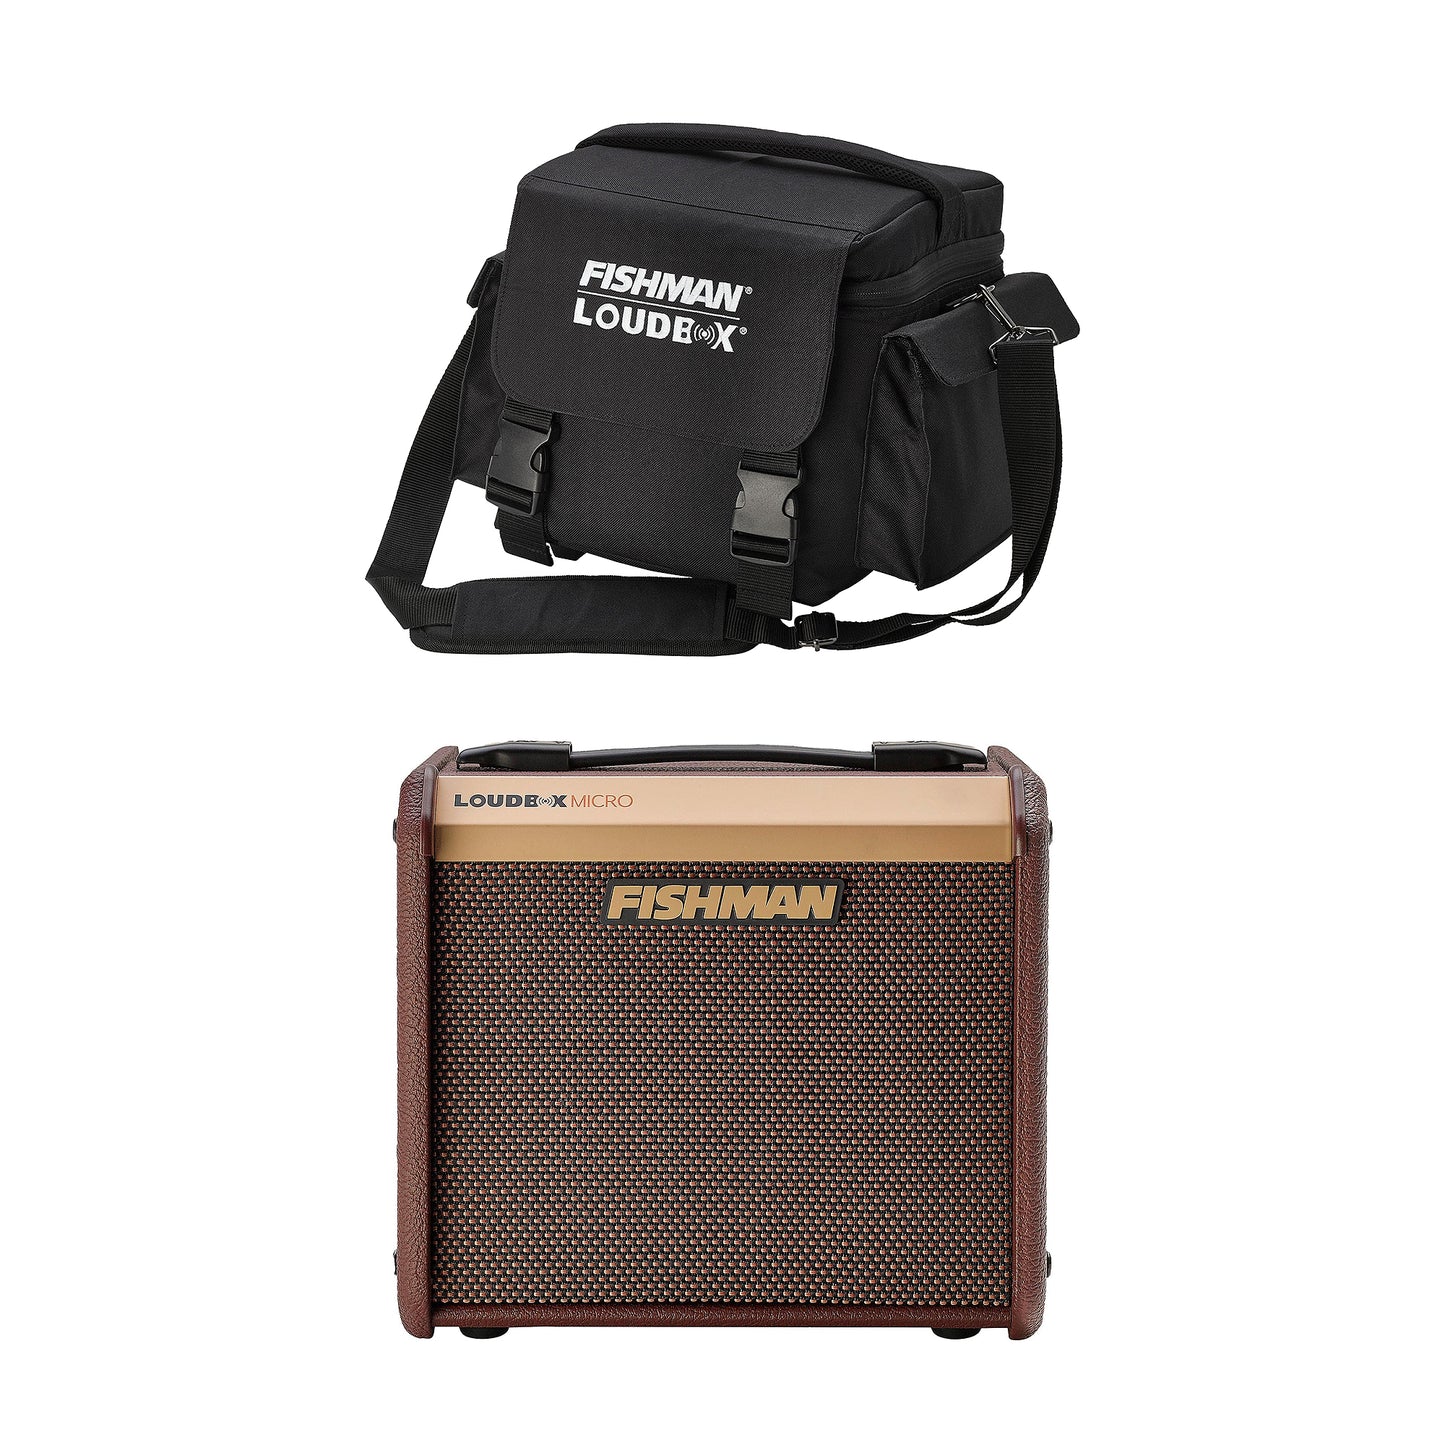 Fishman Loudbox Micro 40w Acoustic Instrument Amp and Micro Deluxe Carry Bag Bundle